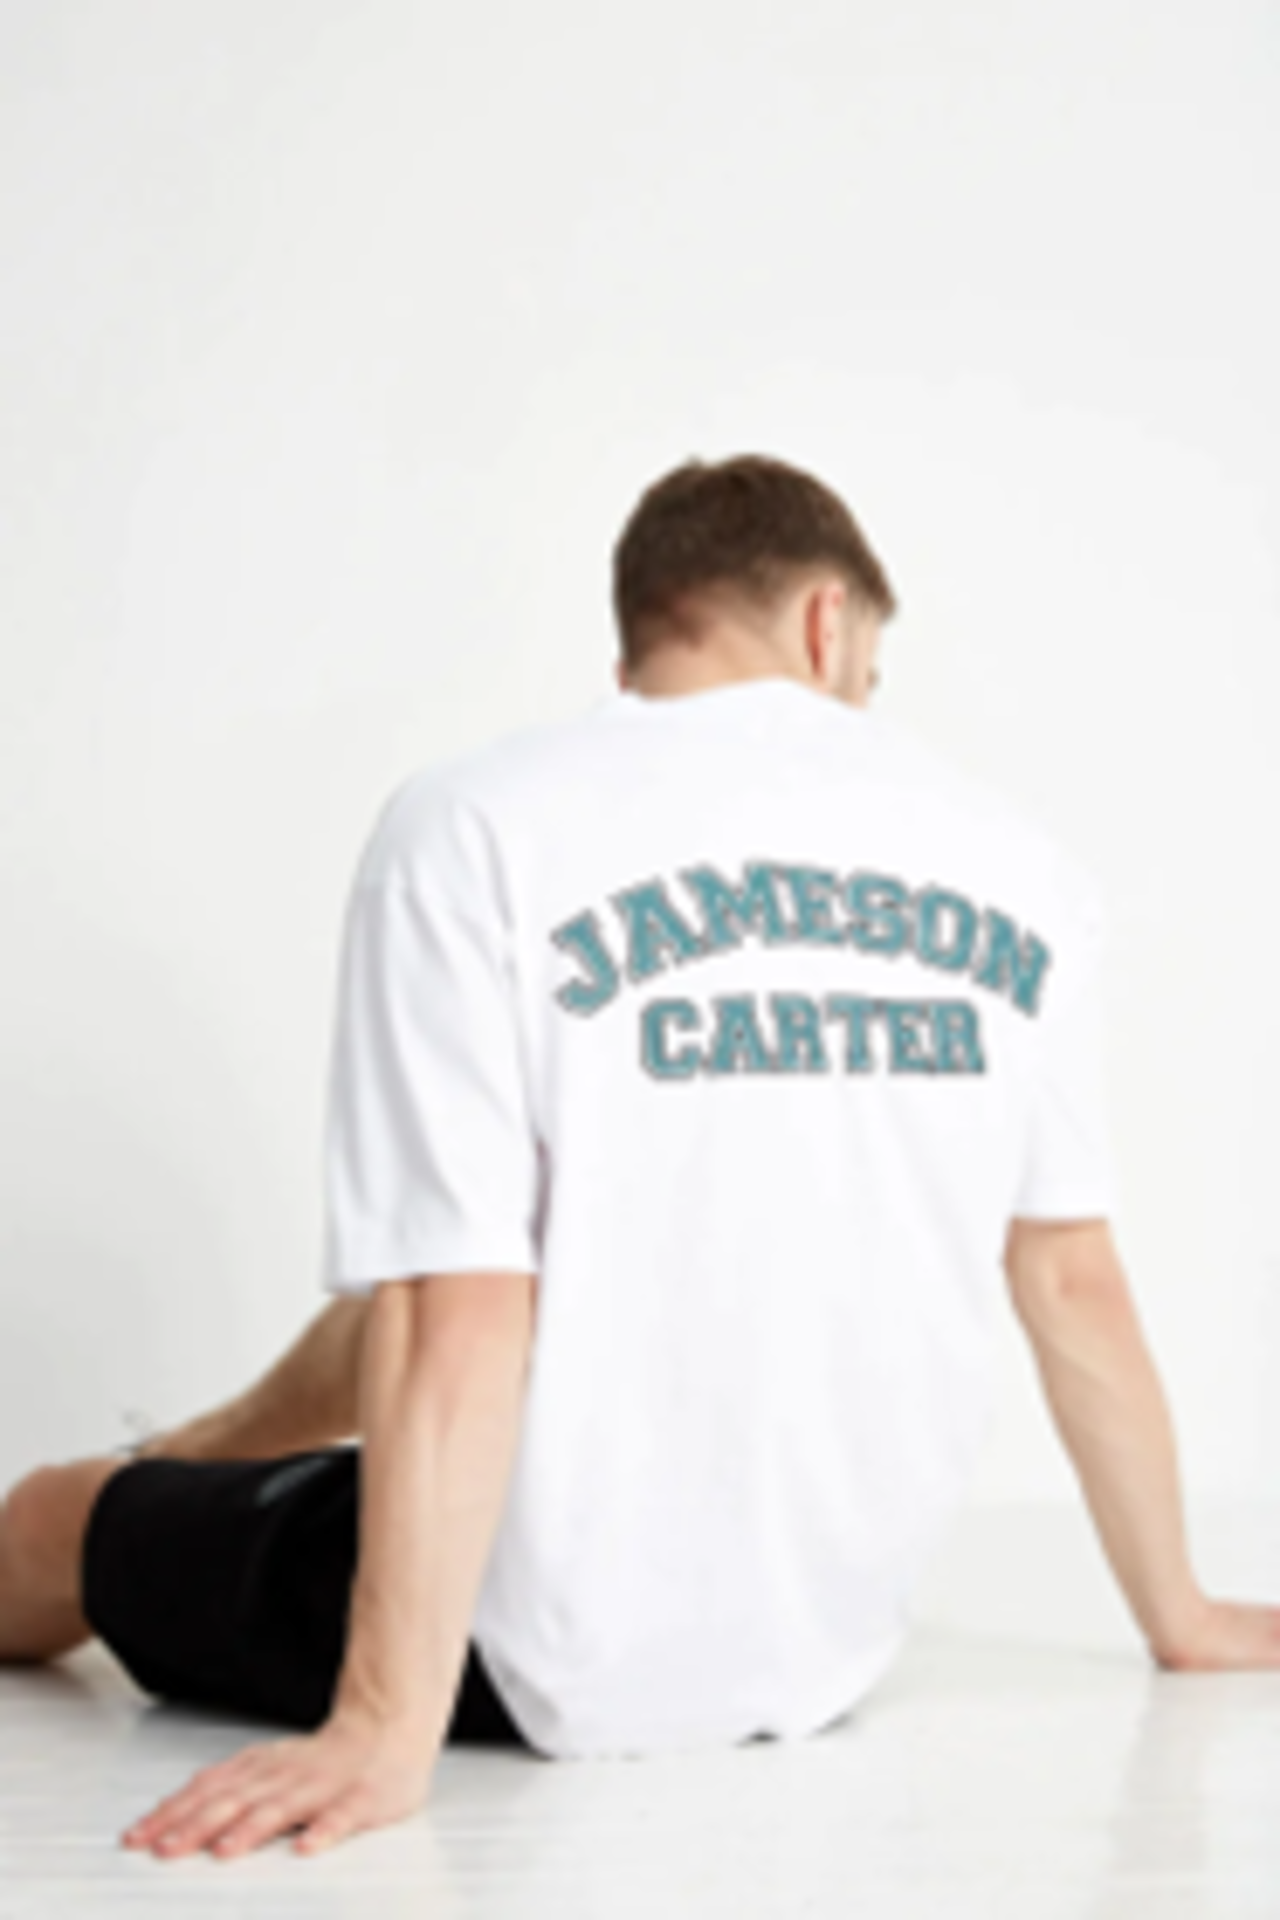 TRADE LOT 100 x NEW MIXED ITEMS OF JAMESON CARTER STOCK. TO INCLUDE ITEMS SUCH AS: JACKETS, - Image 7 of 14